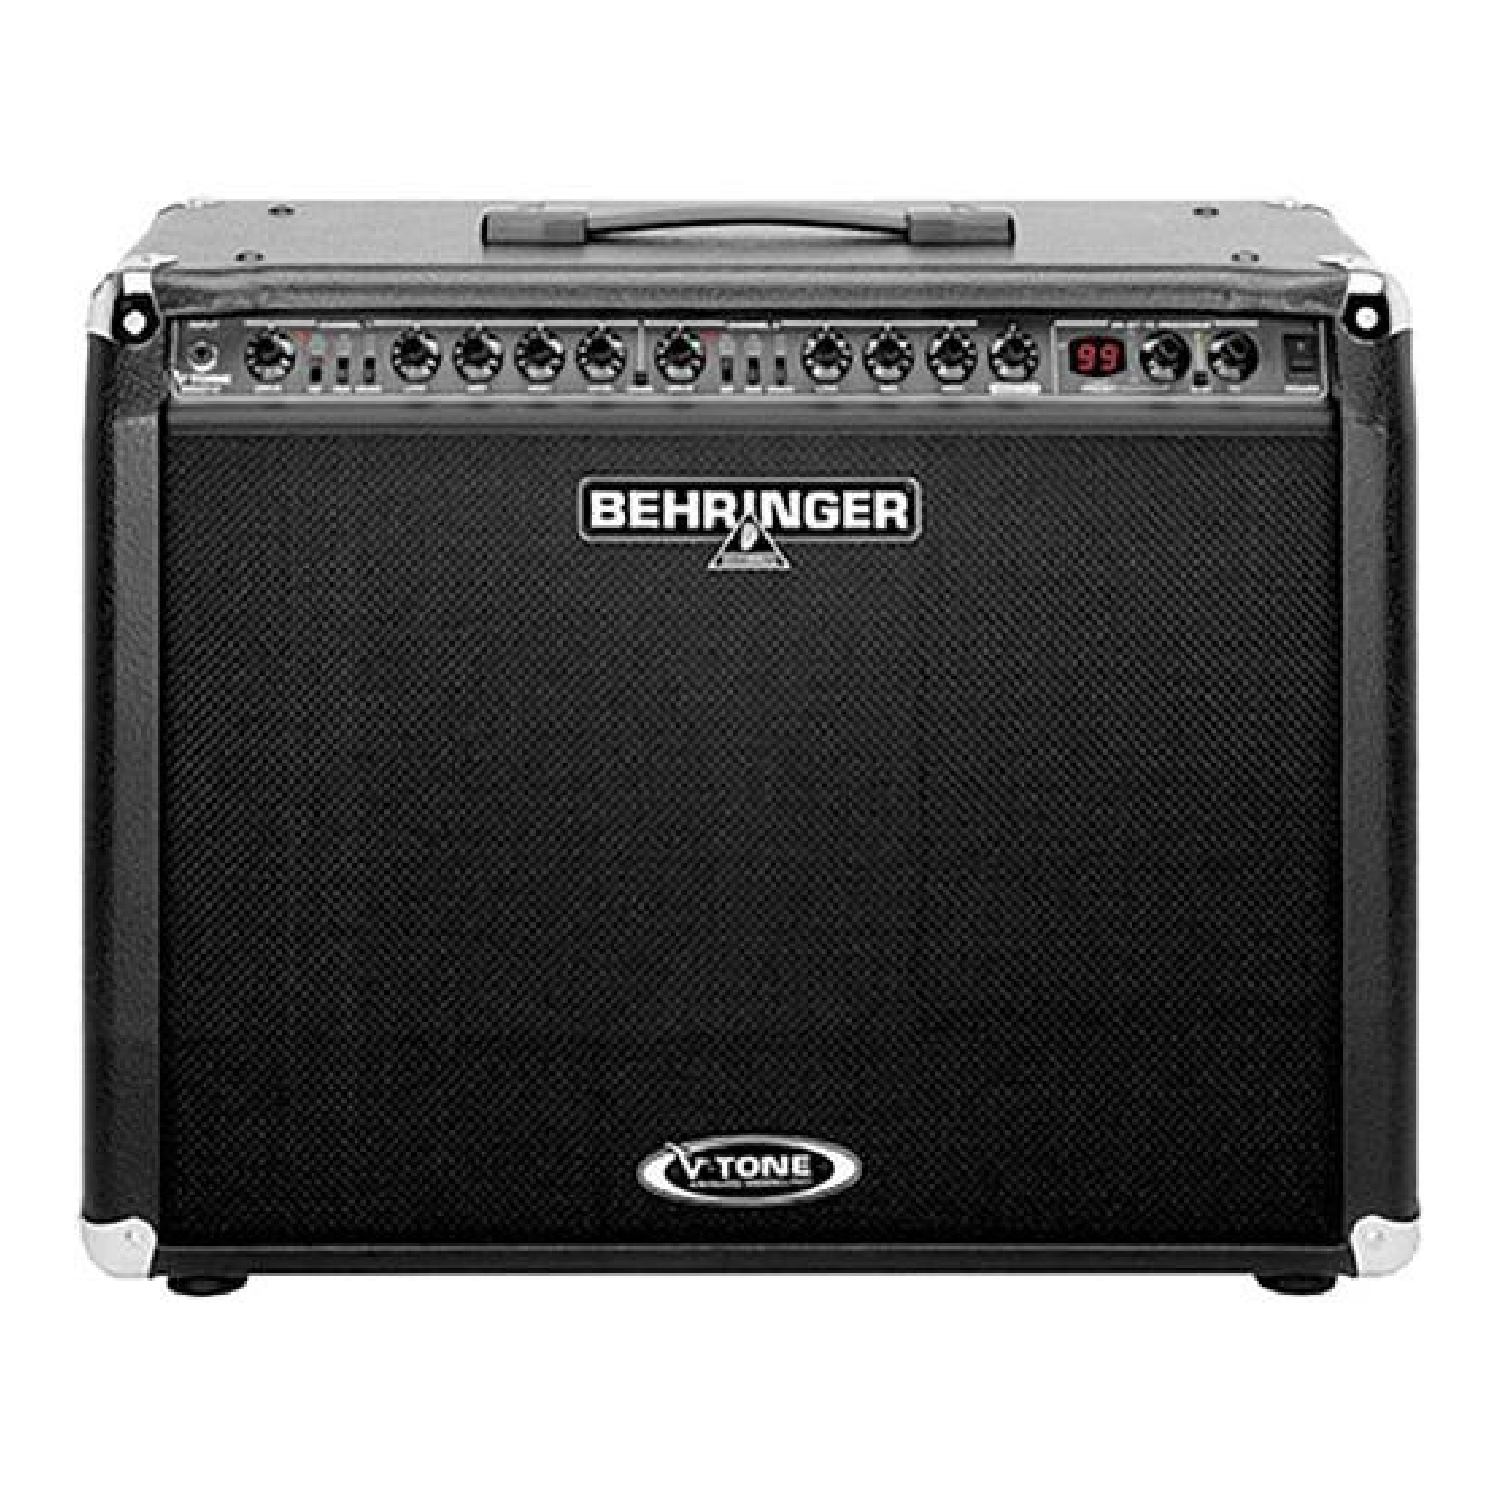 2 x 30 Watts Guitar Amp 10 Inch 24 bit Stereo Multi Effects Processor with Foot Switch   GMX210 behringer